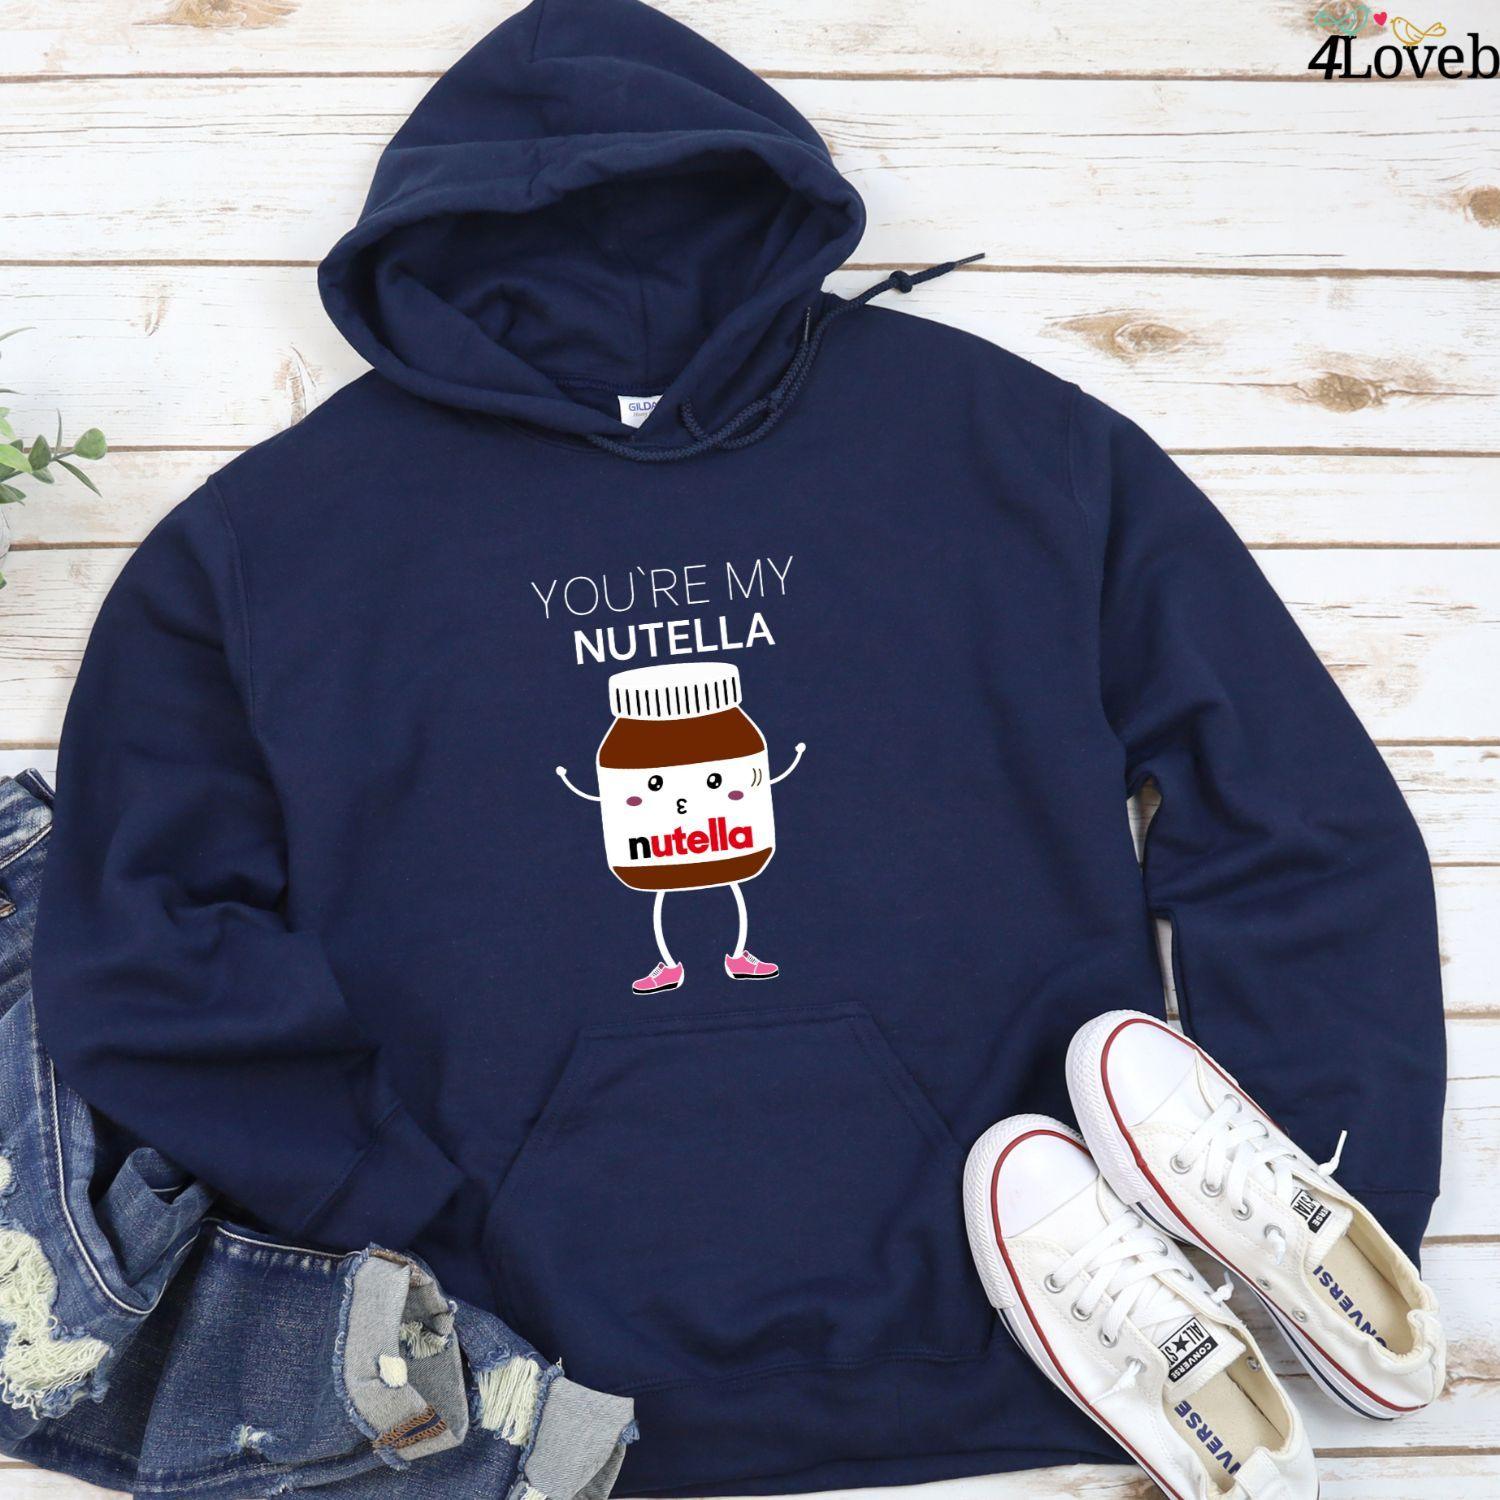 Nutella & Bread Fans' Matching Sets - Celebrate Love - Perfect Duo Outfits for Couples - 4Lovebirds